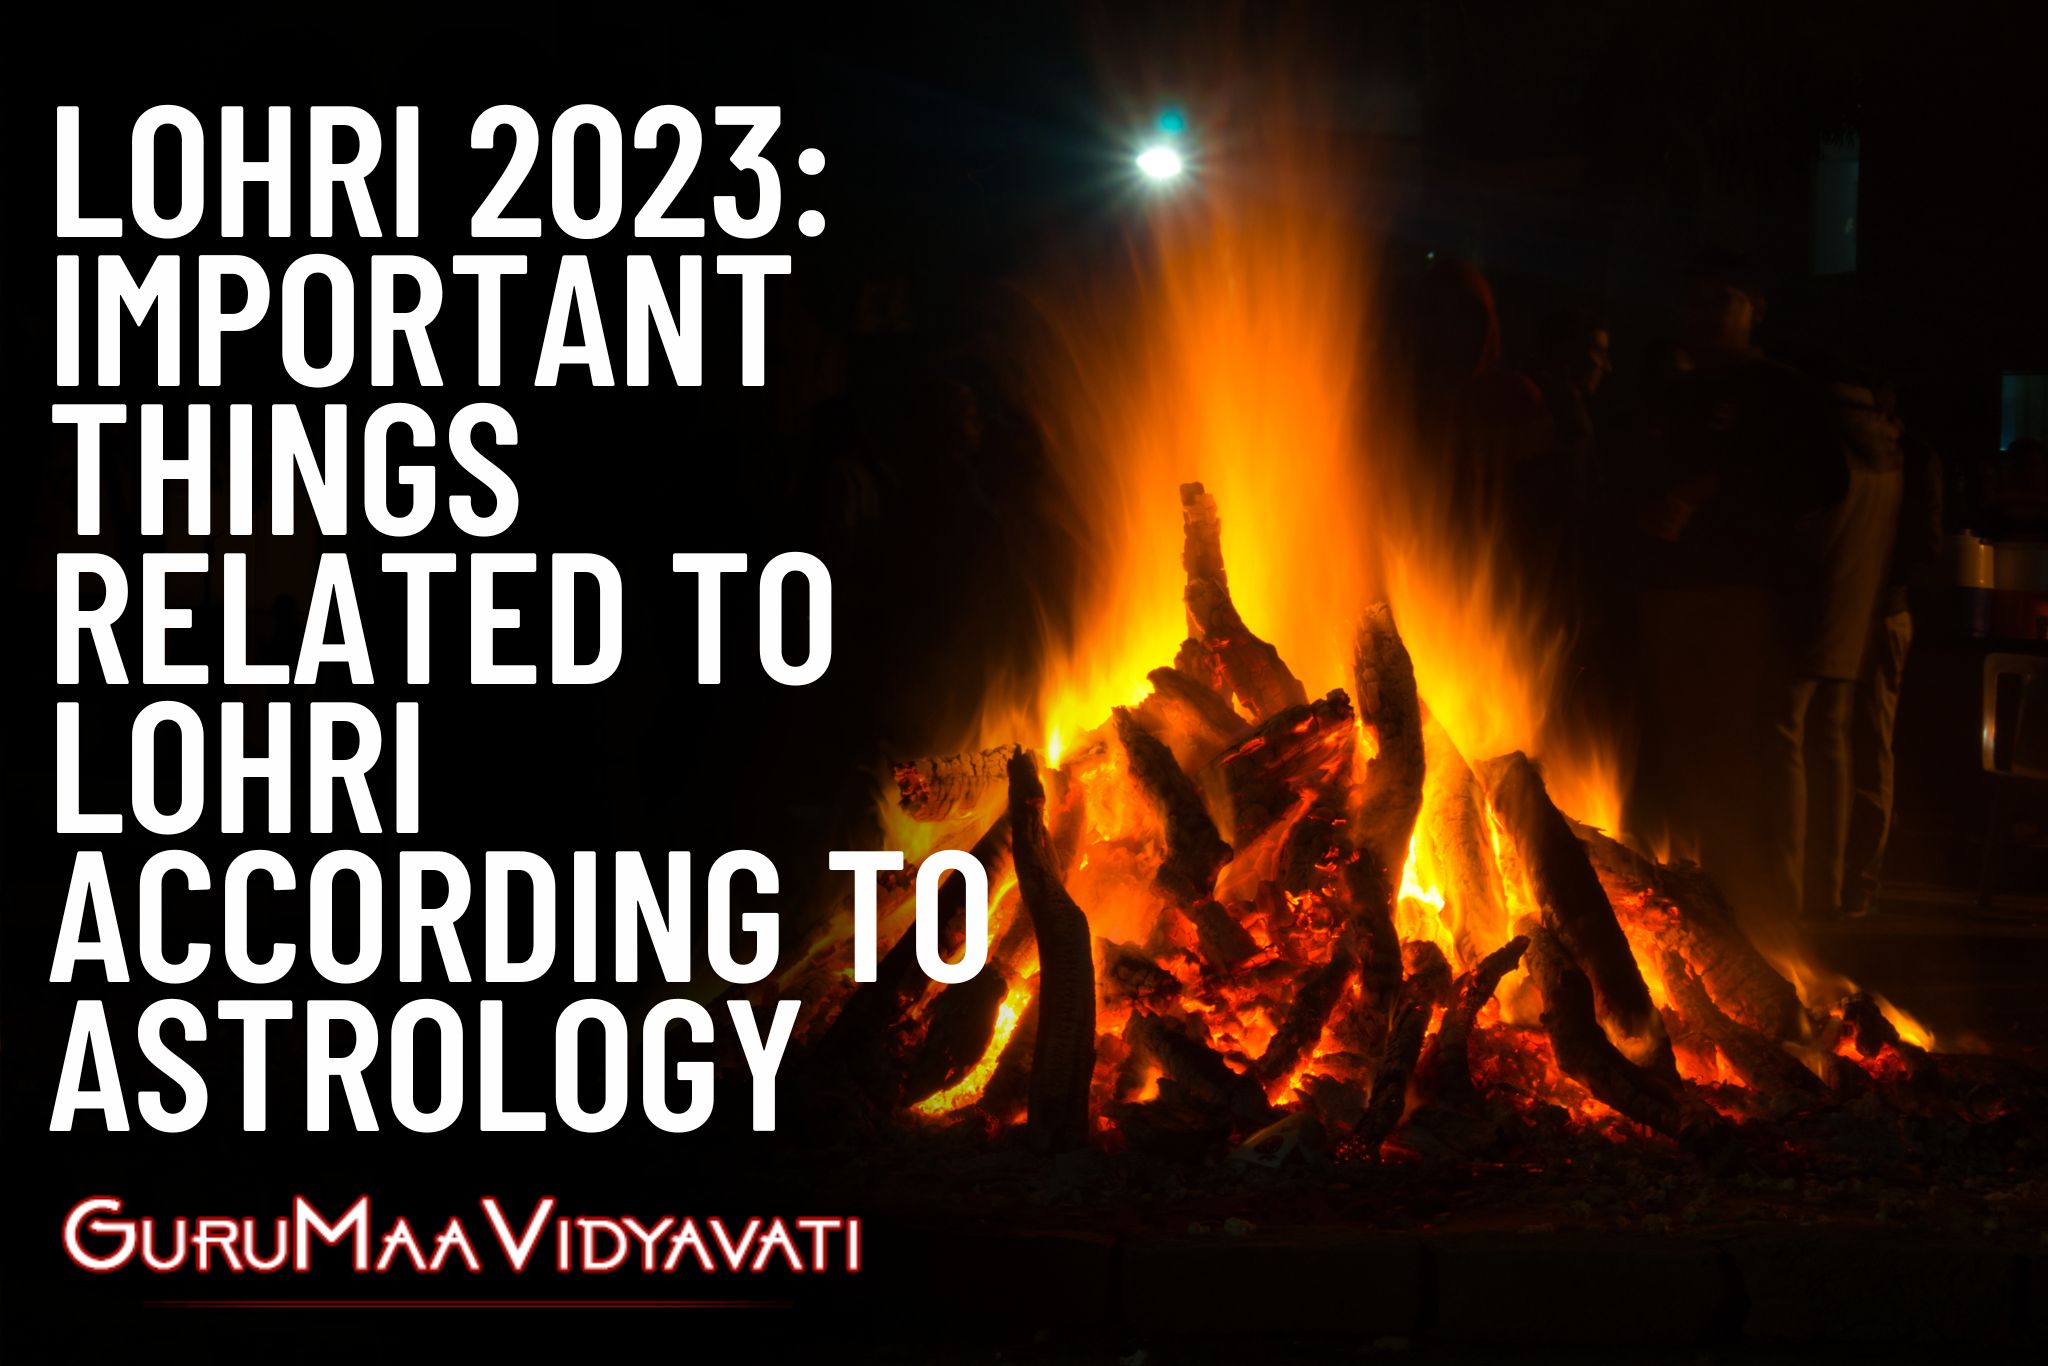 Lohri 2023: Important things related to Lohri 2023 According to Astrology